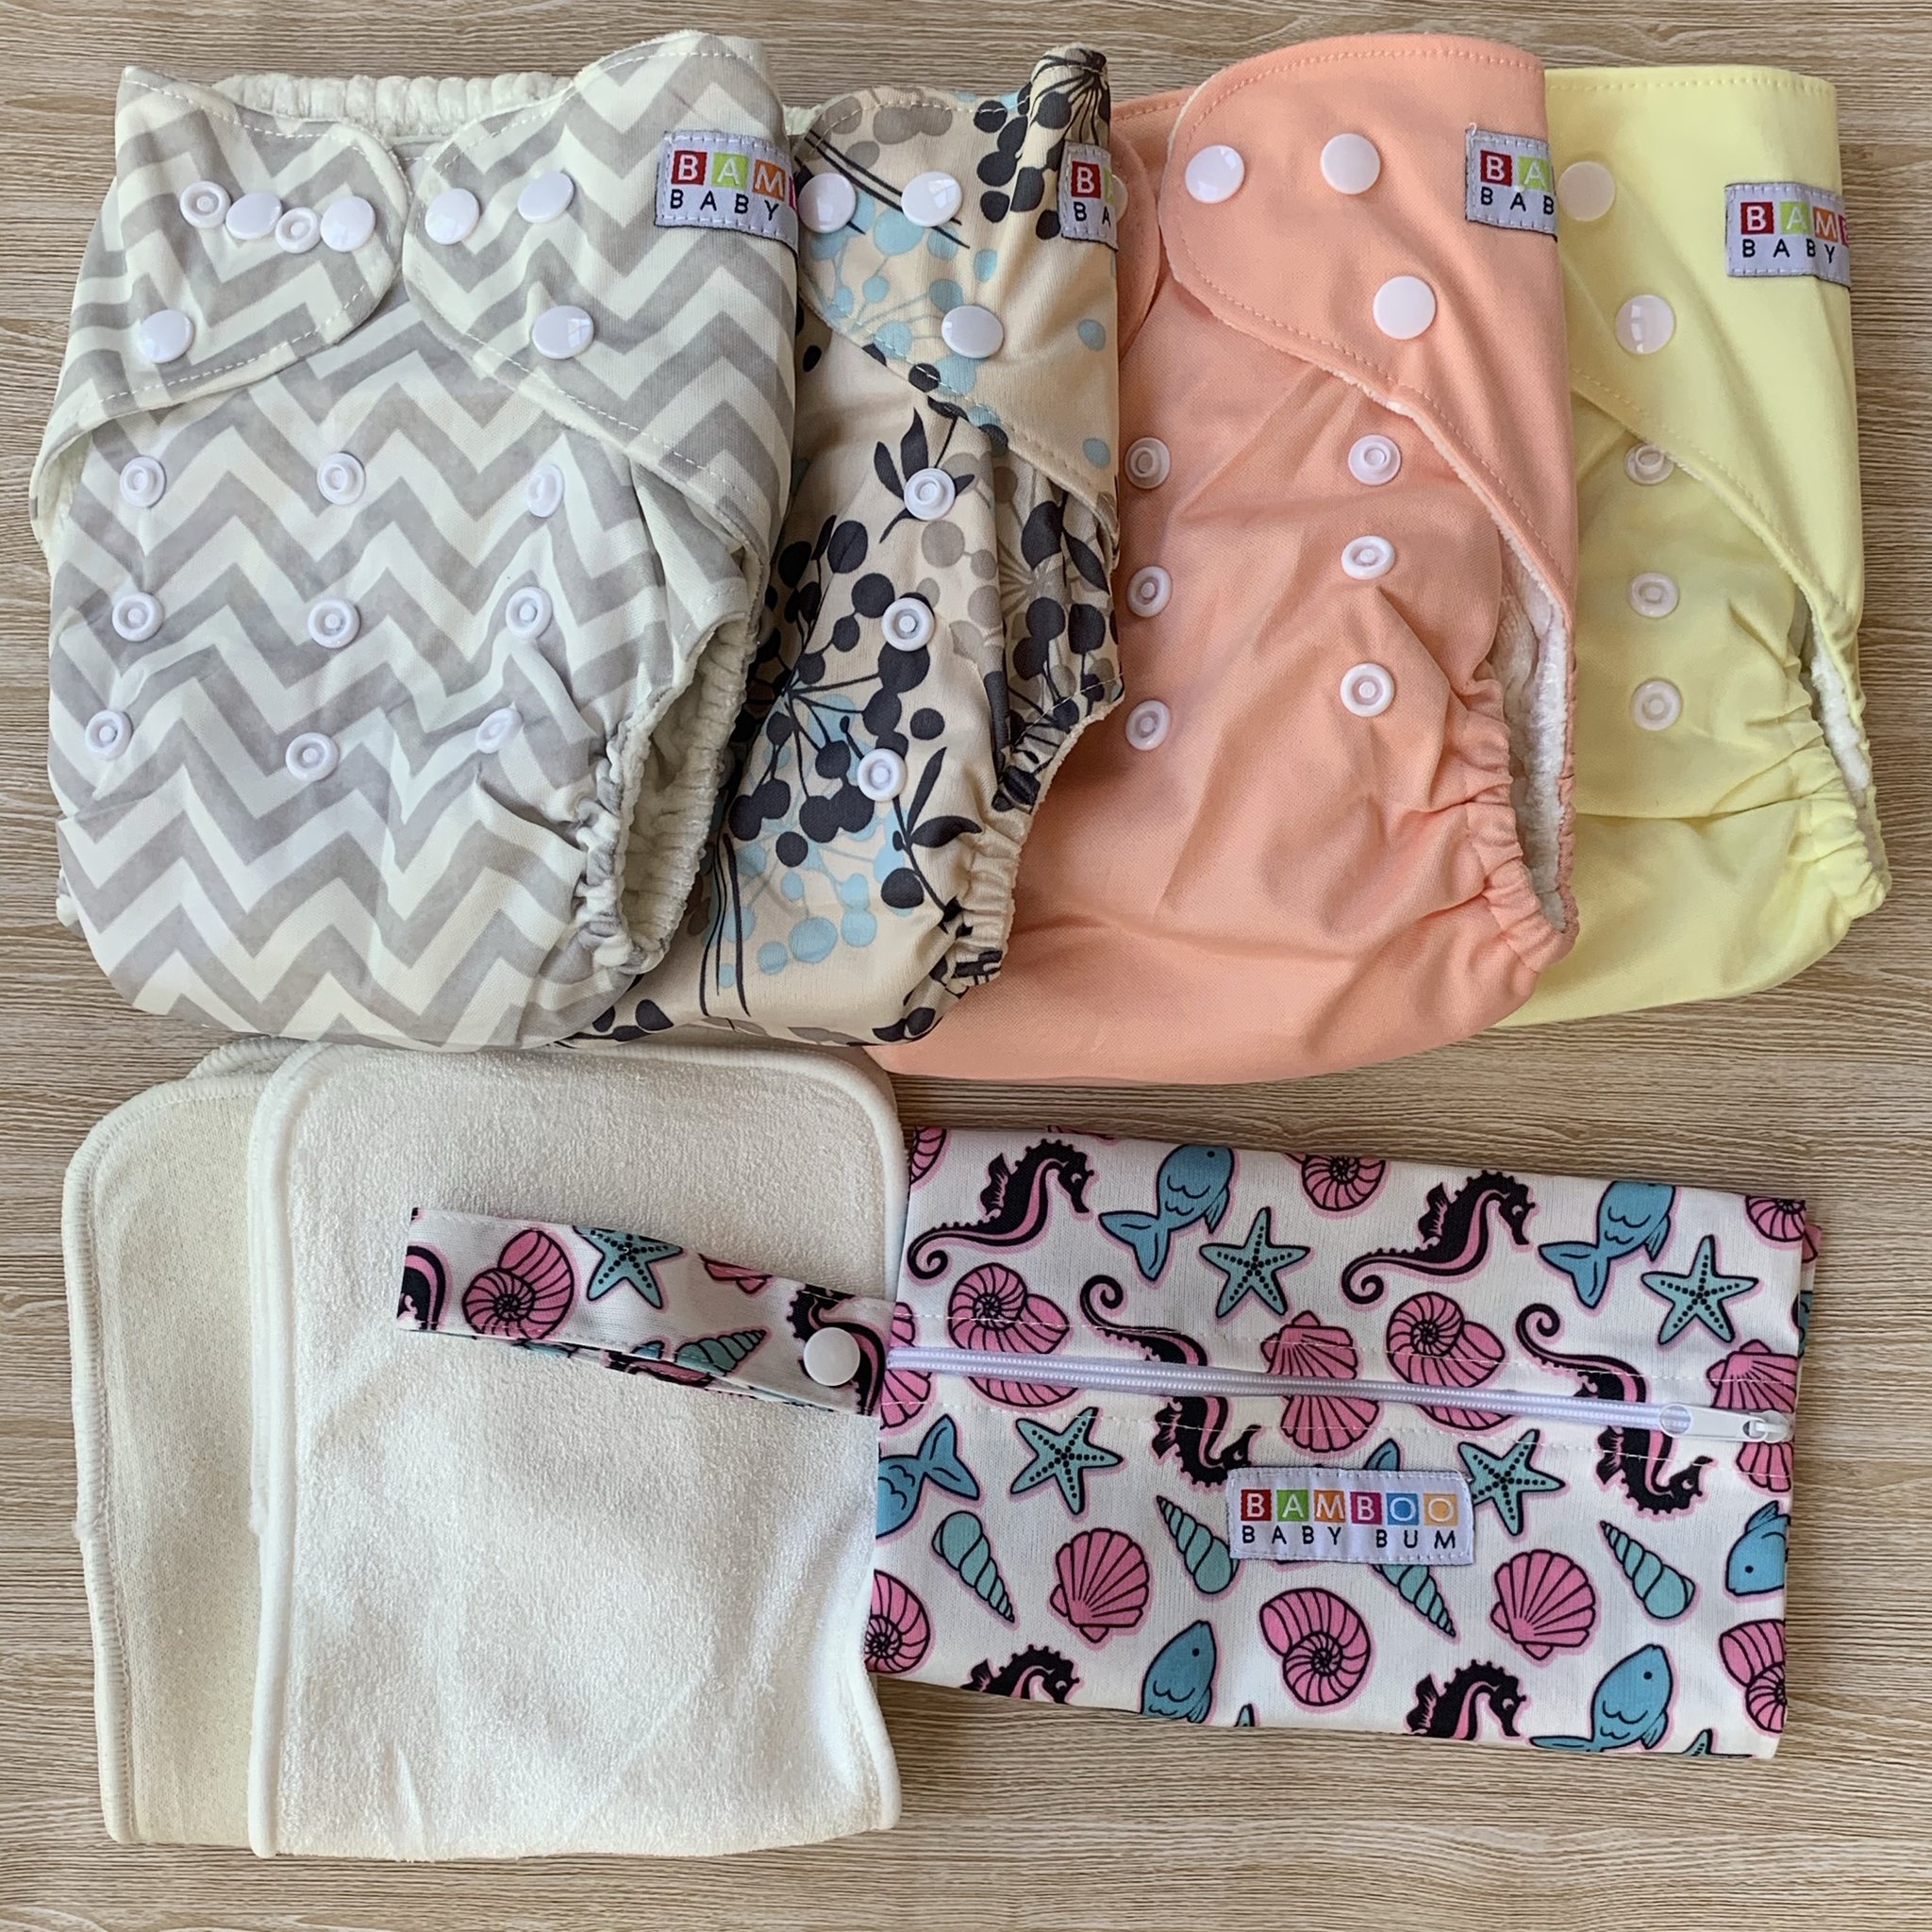 Cloth diapers - Bamboo baby Bum